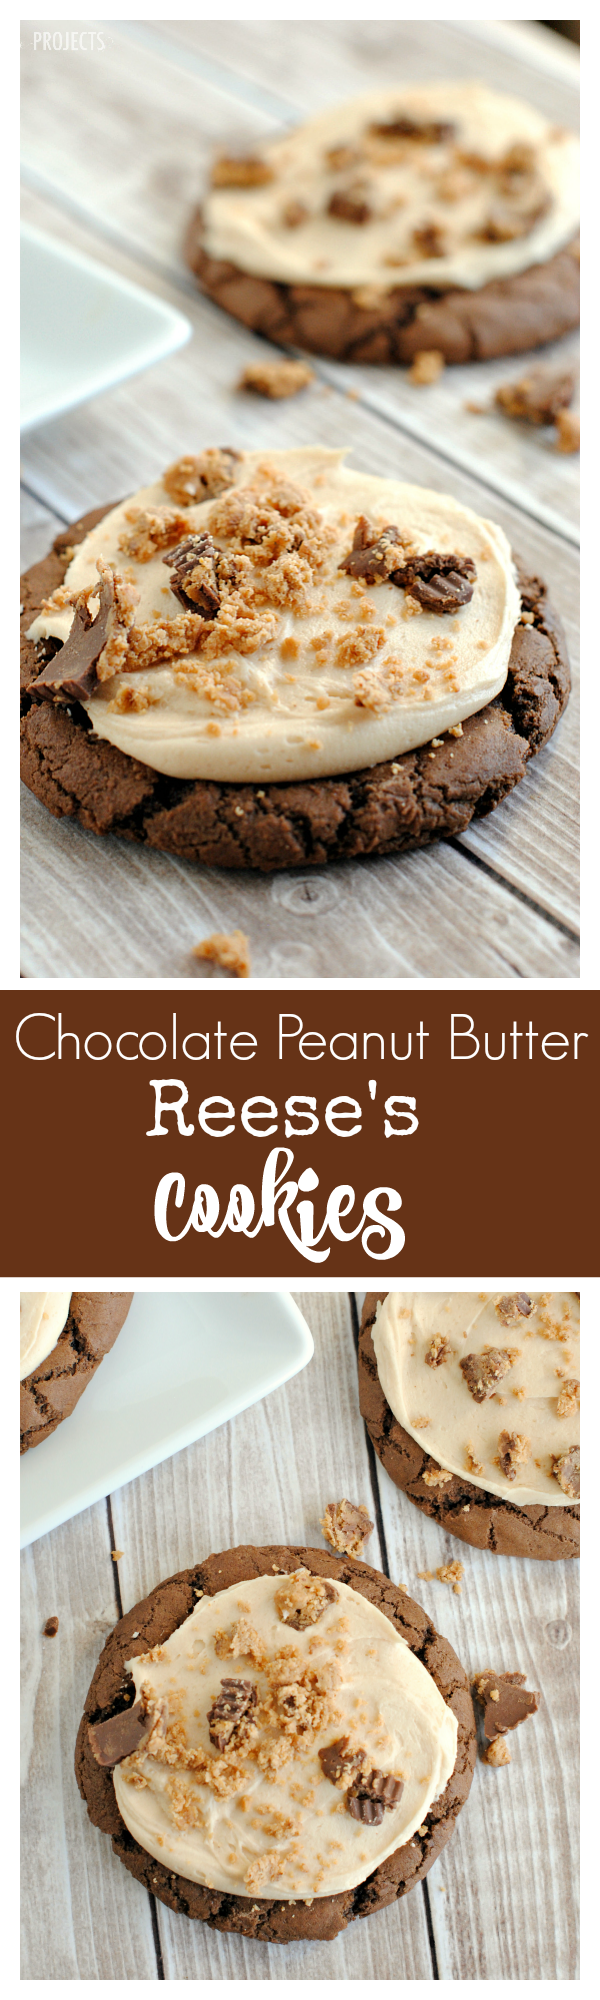 Soft and Chewy Chocolate Peanut Butter Reese's Cookies